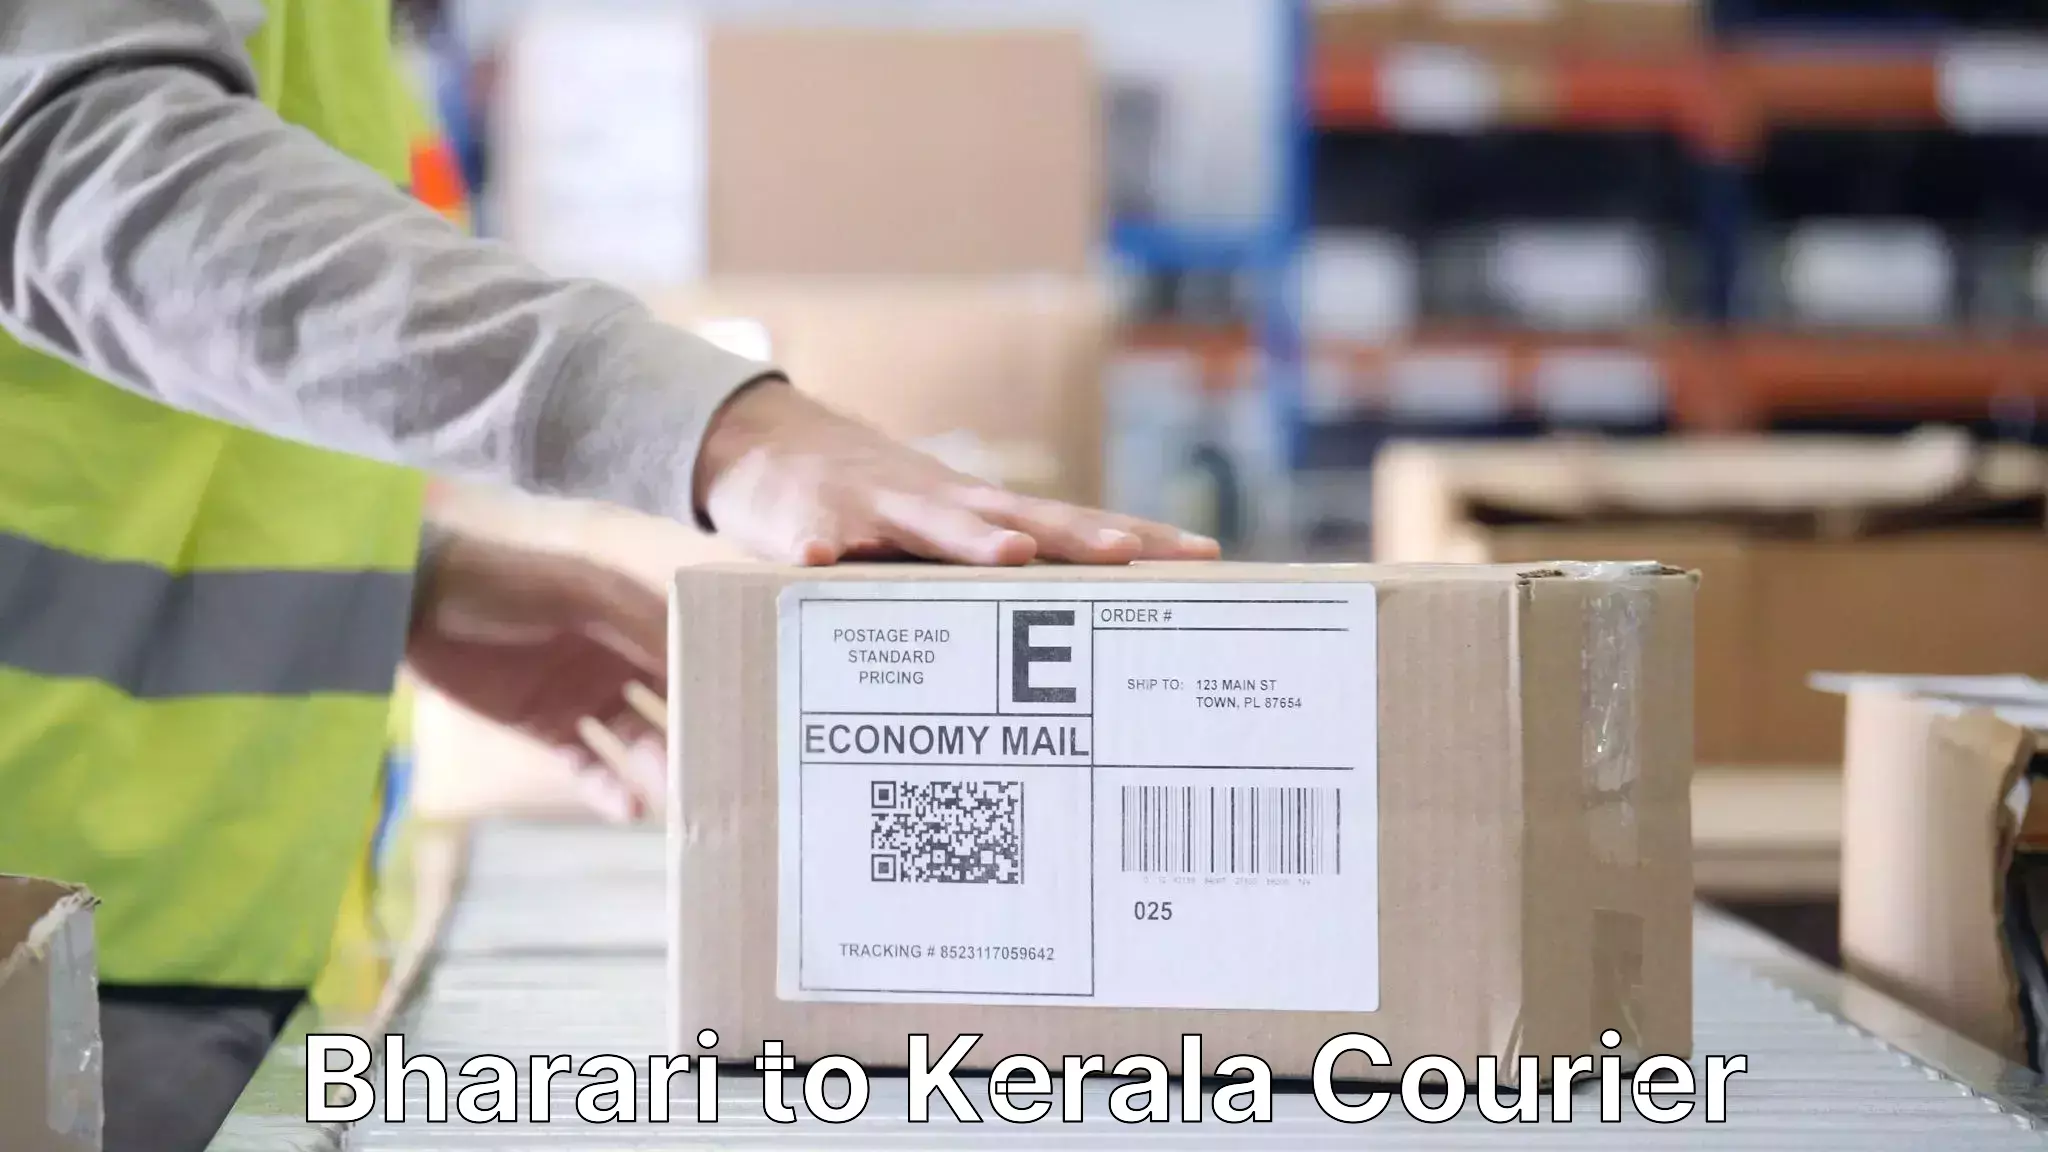 Furniture delivery service Bharari to Kerala